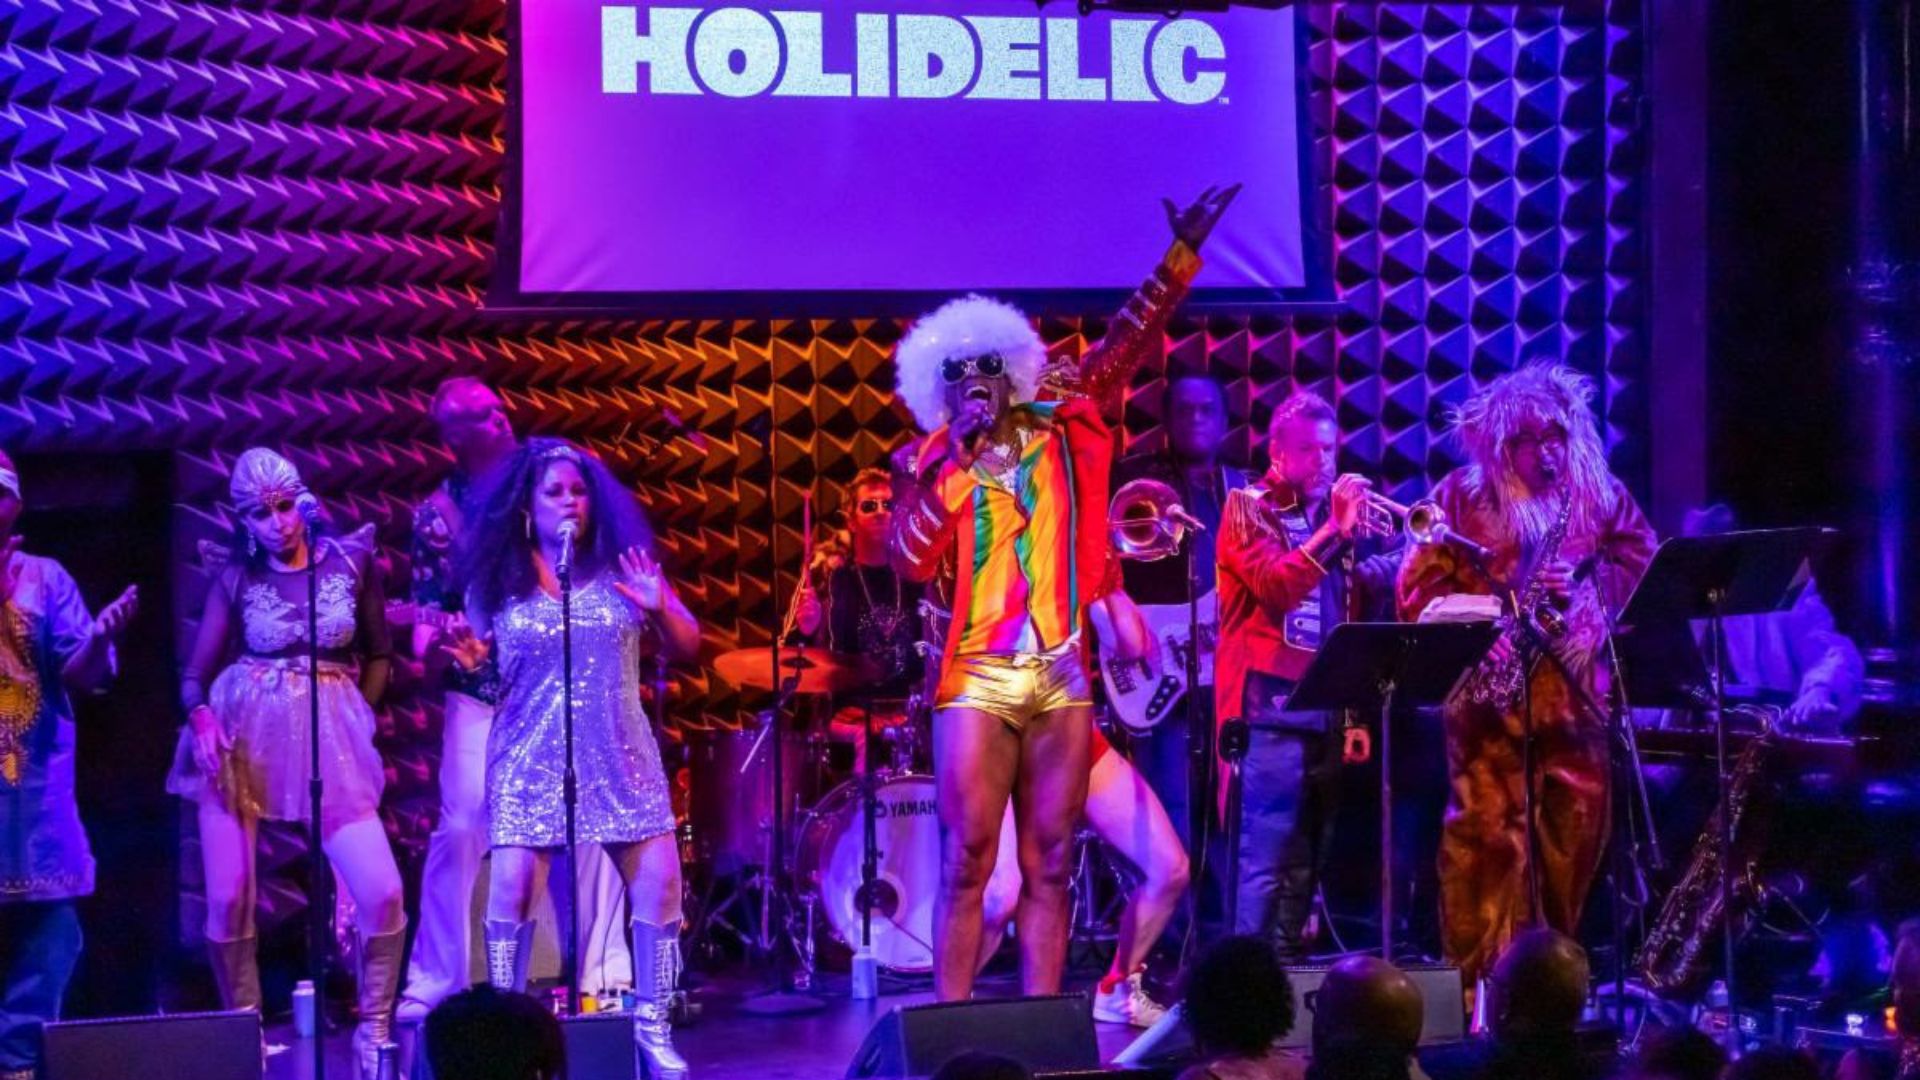 Everett Bradley's "Holidelic" Holiday Funk Revue Attached photo by Mikiodo